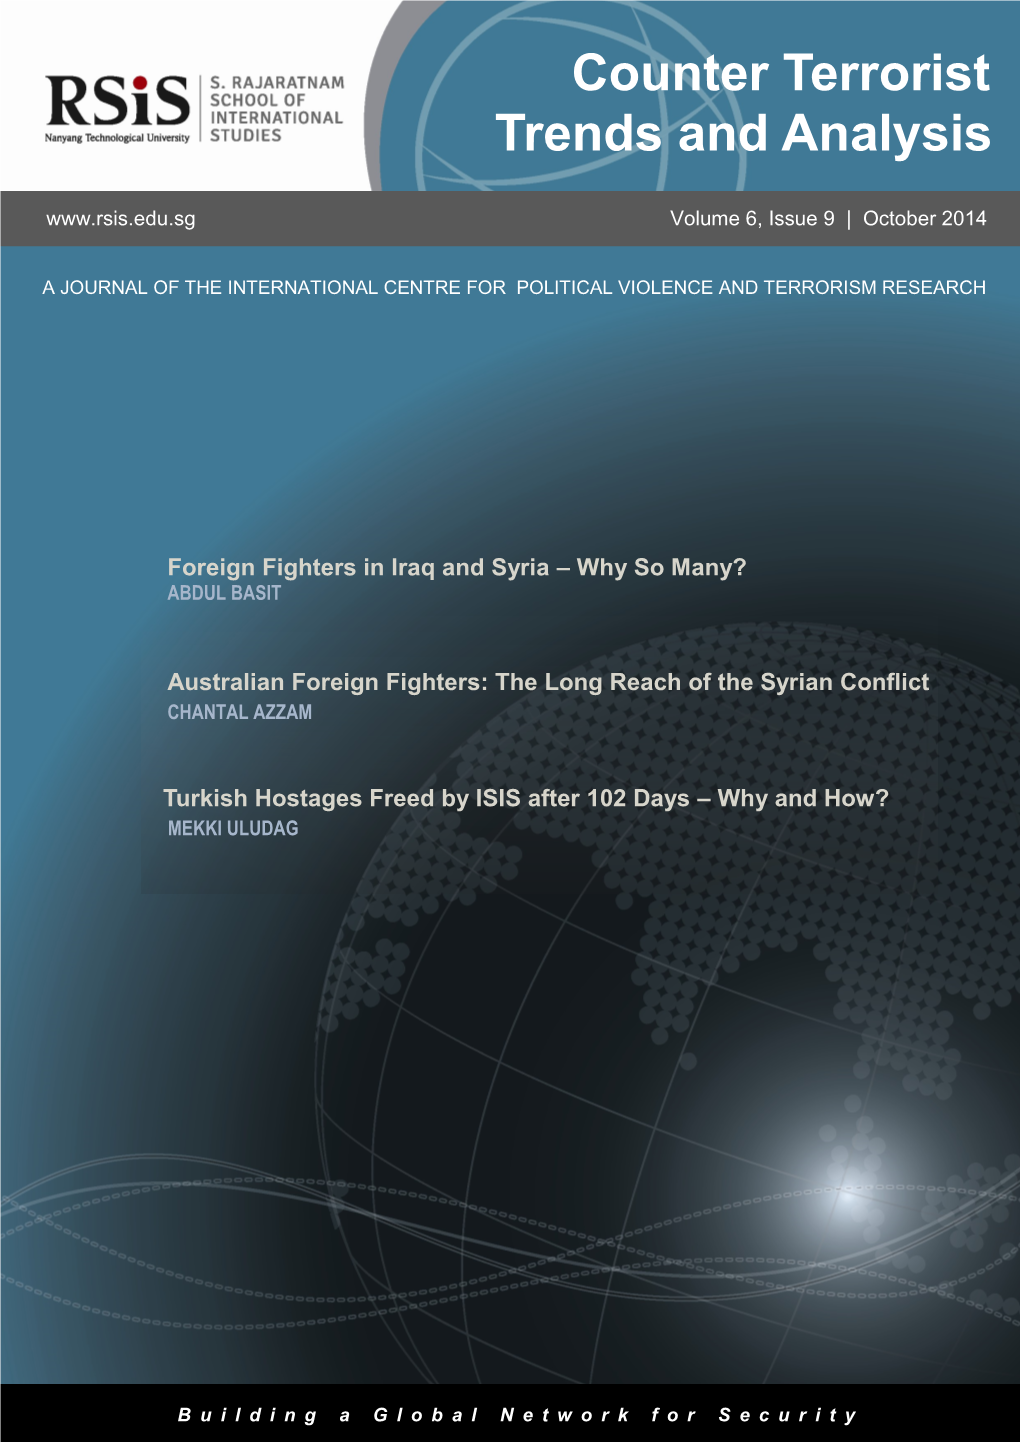 Counter Terrorist Trends and Analysis October 2014